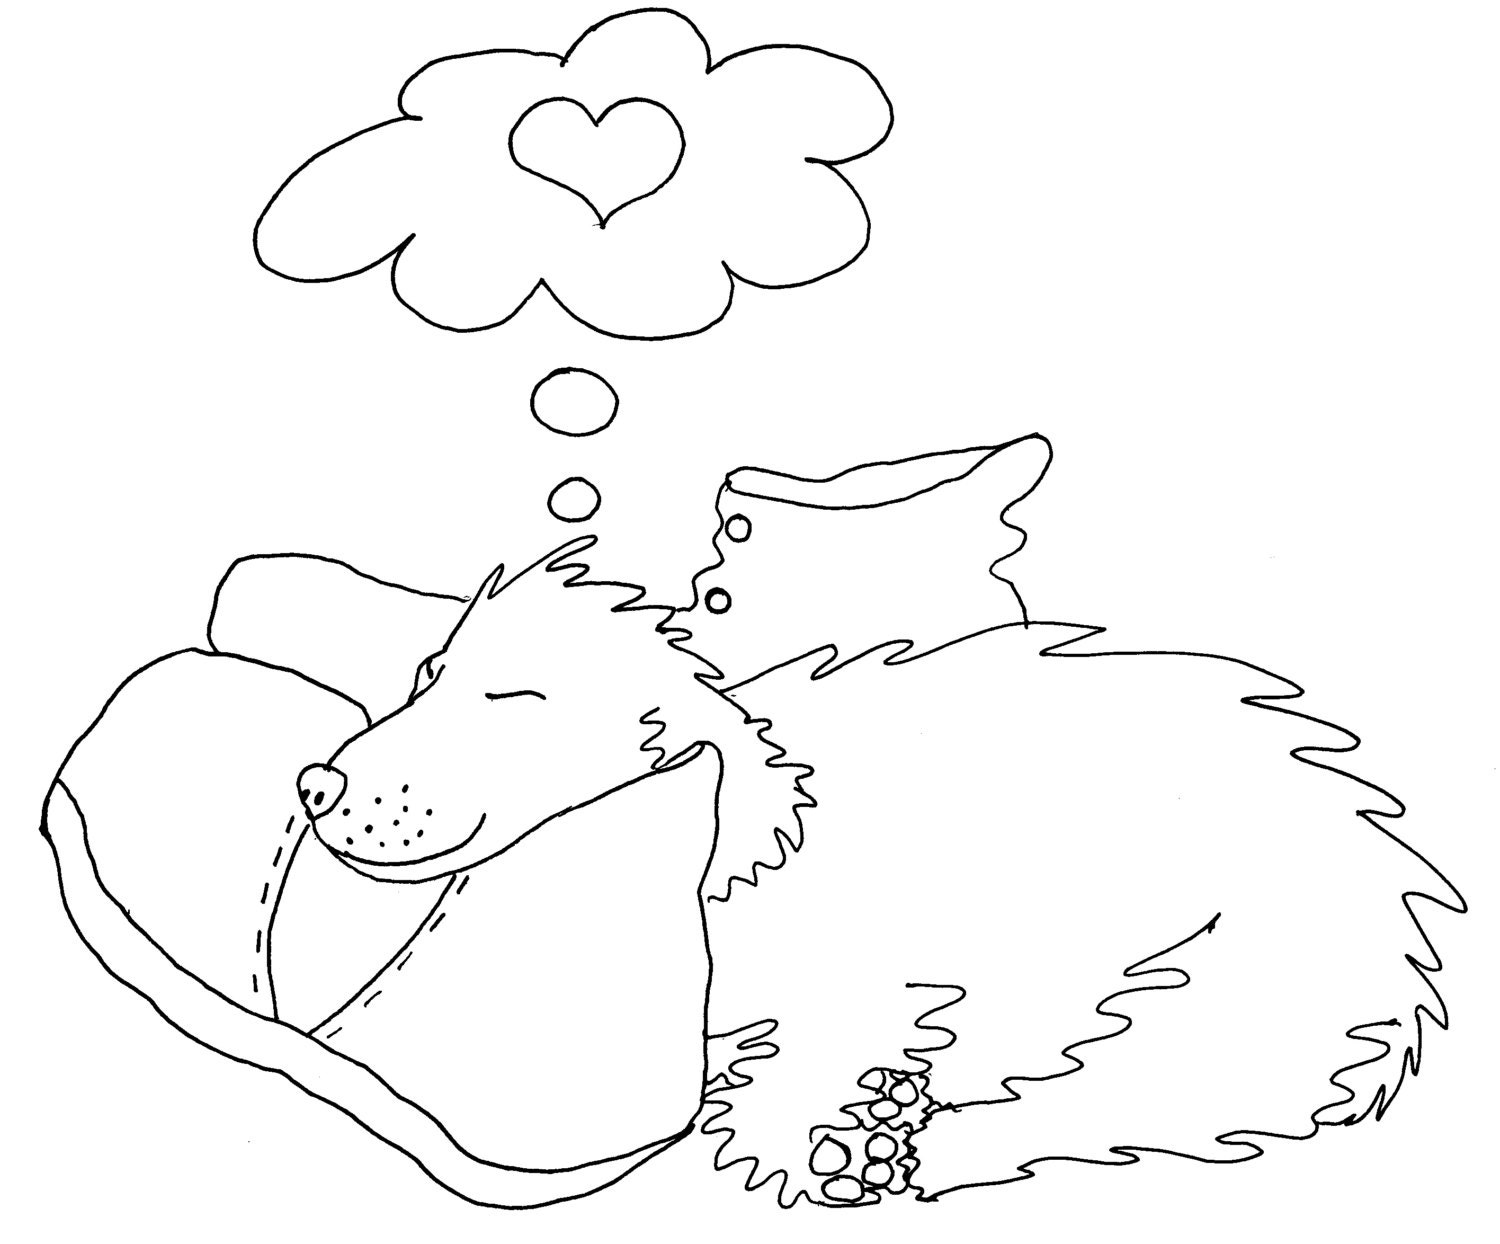 Puppy Love Cute Adult Coloring Page by Chubby Art Cartoons